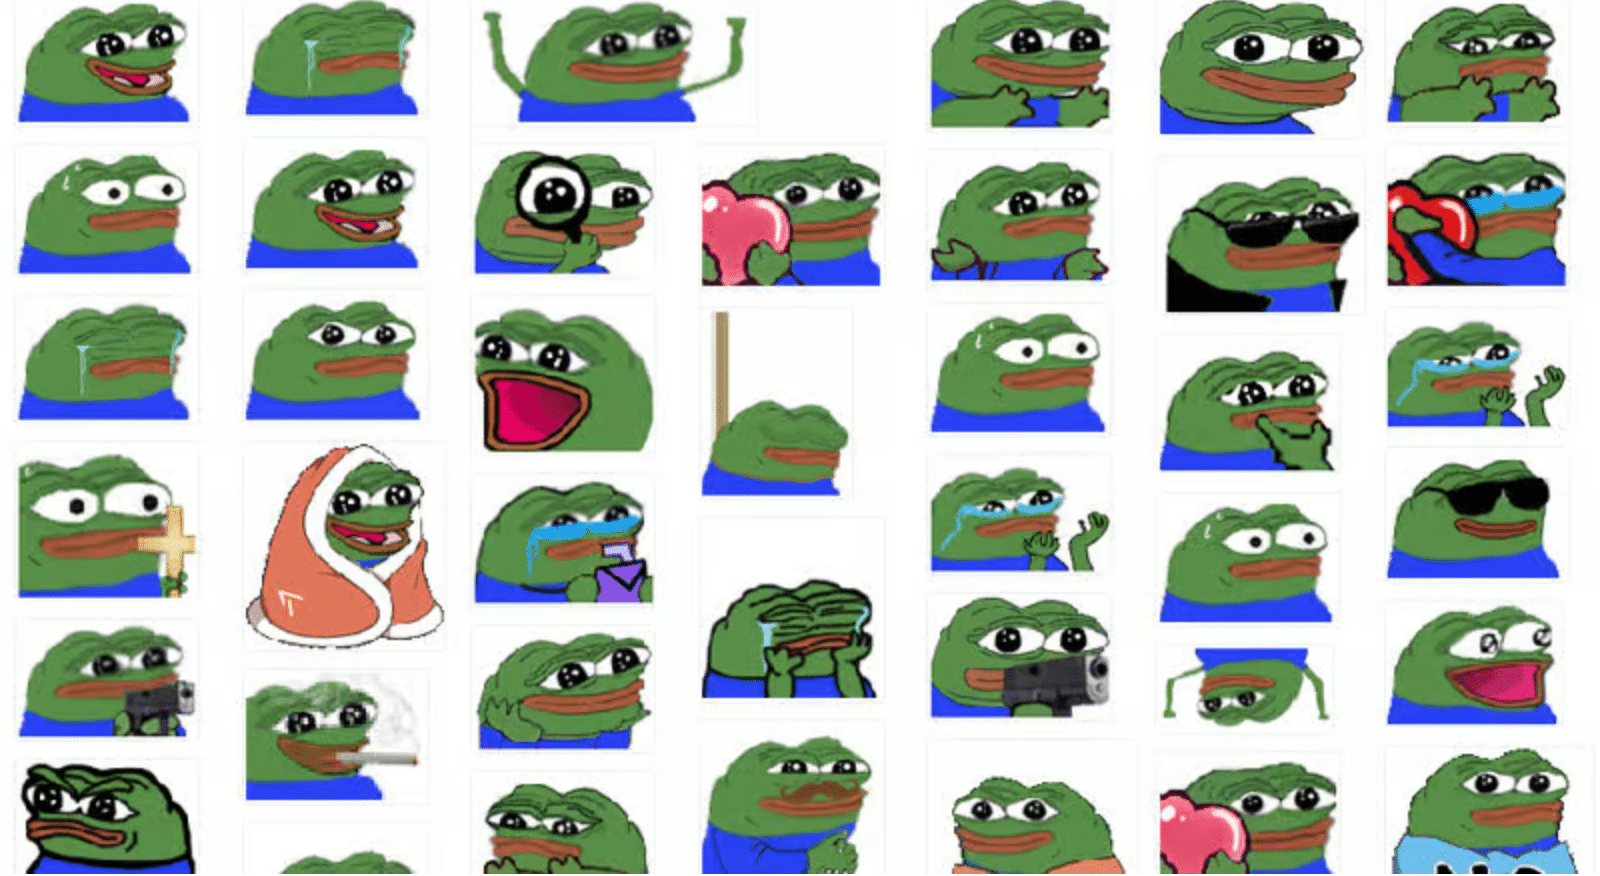 Different variations of Pepe